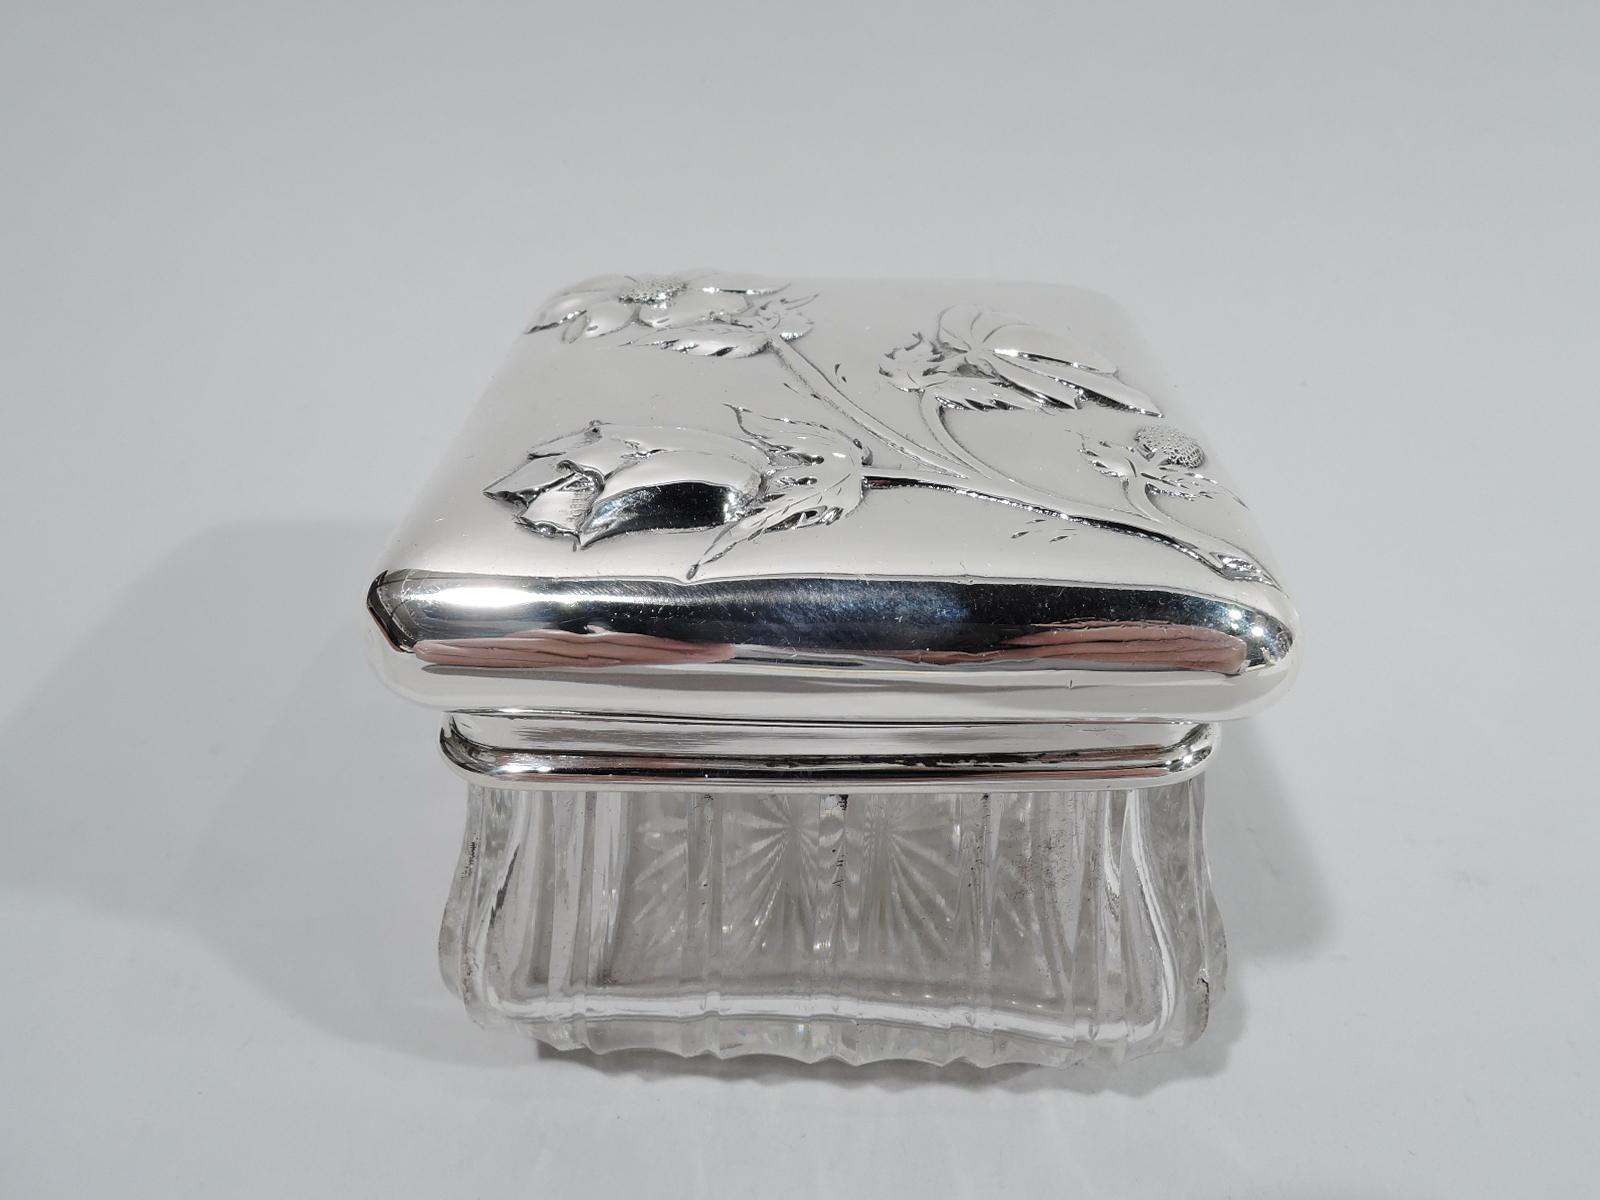 French glass jar with 950 silver mount and cover, ca 1920. Square and bombé with fluted sides and short inset foot with cut star. Collar silver as is cover with curved sides; top raised with chased flowers in various stages of blooming. Pretty with